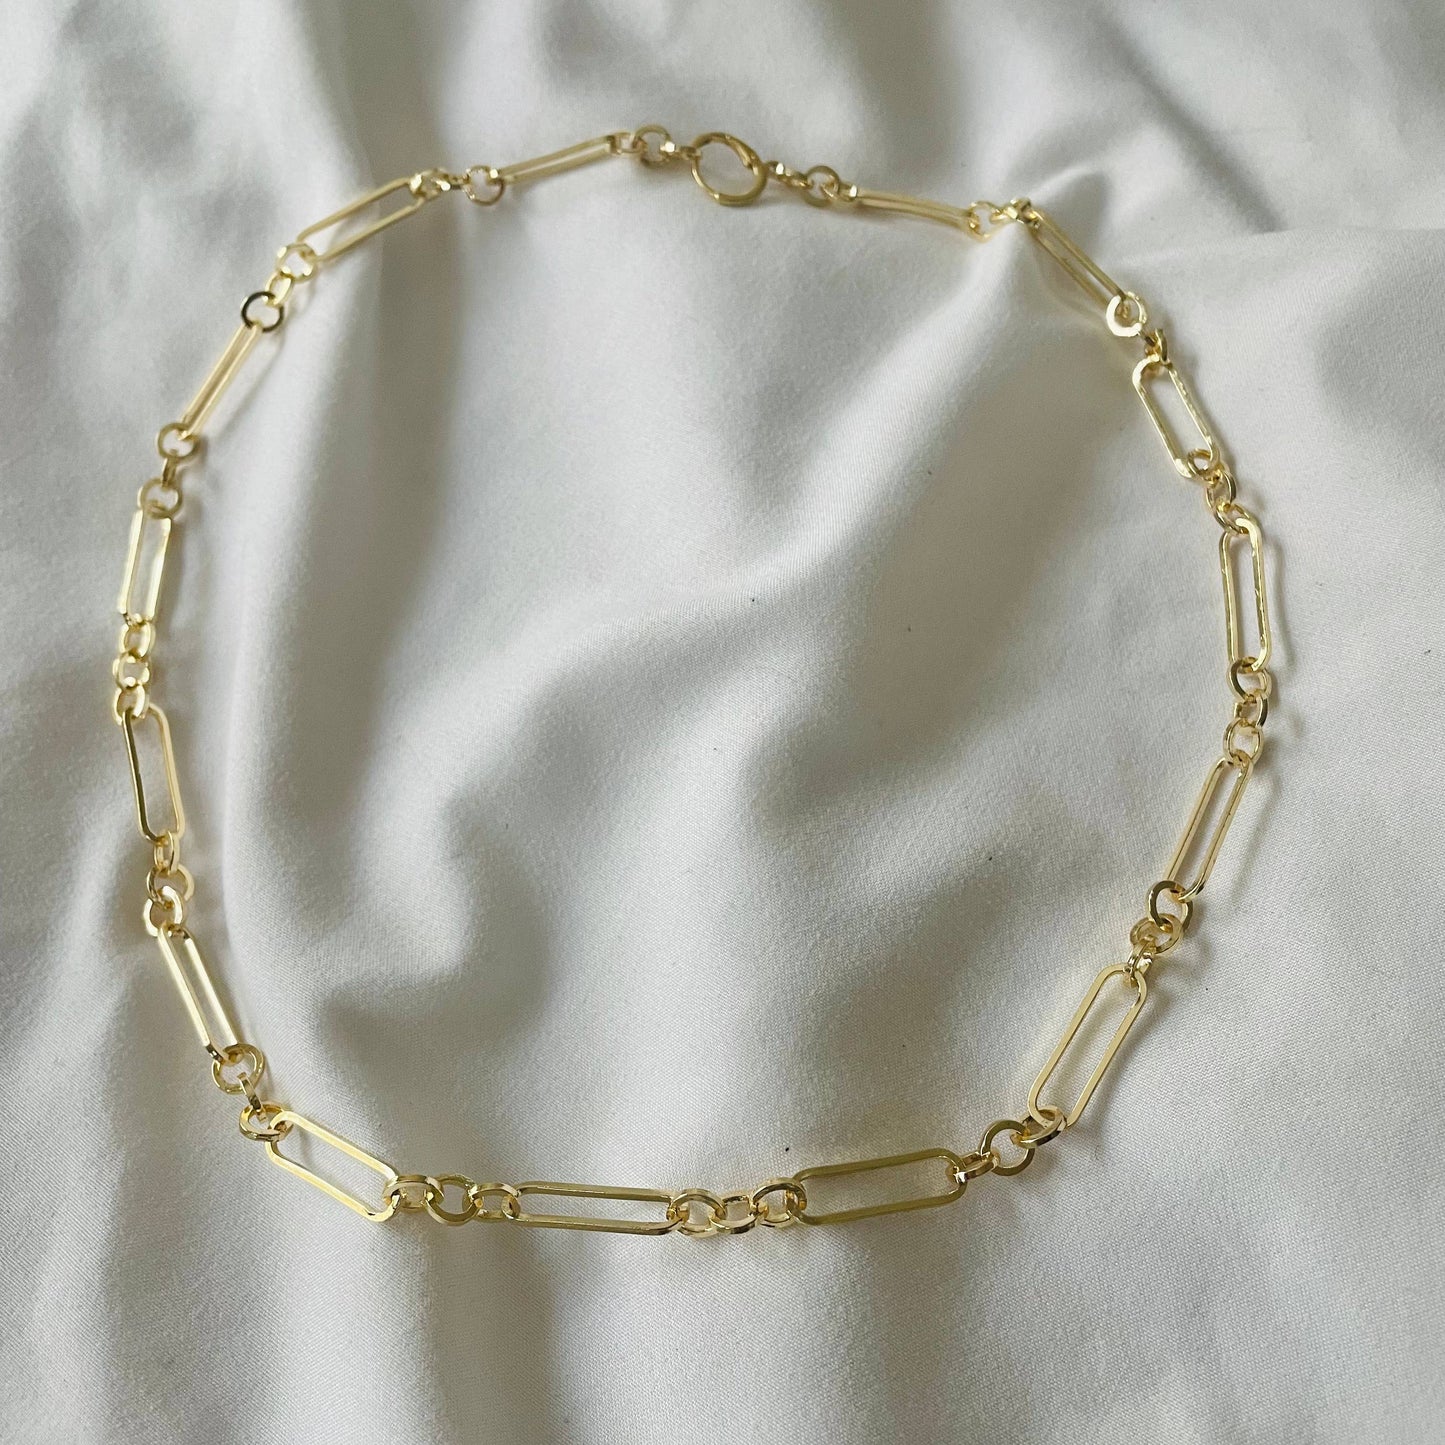 Ophelia Chain Necklace. Gold Filled Chain. Layering Chains